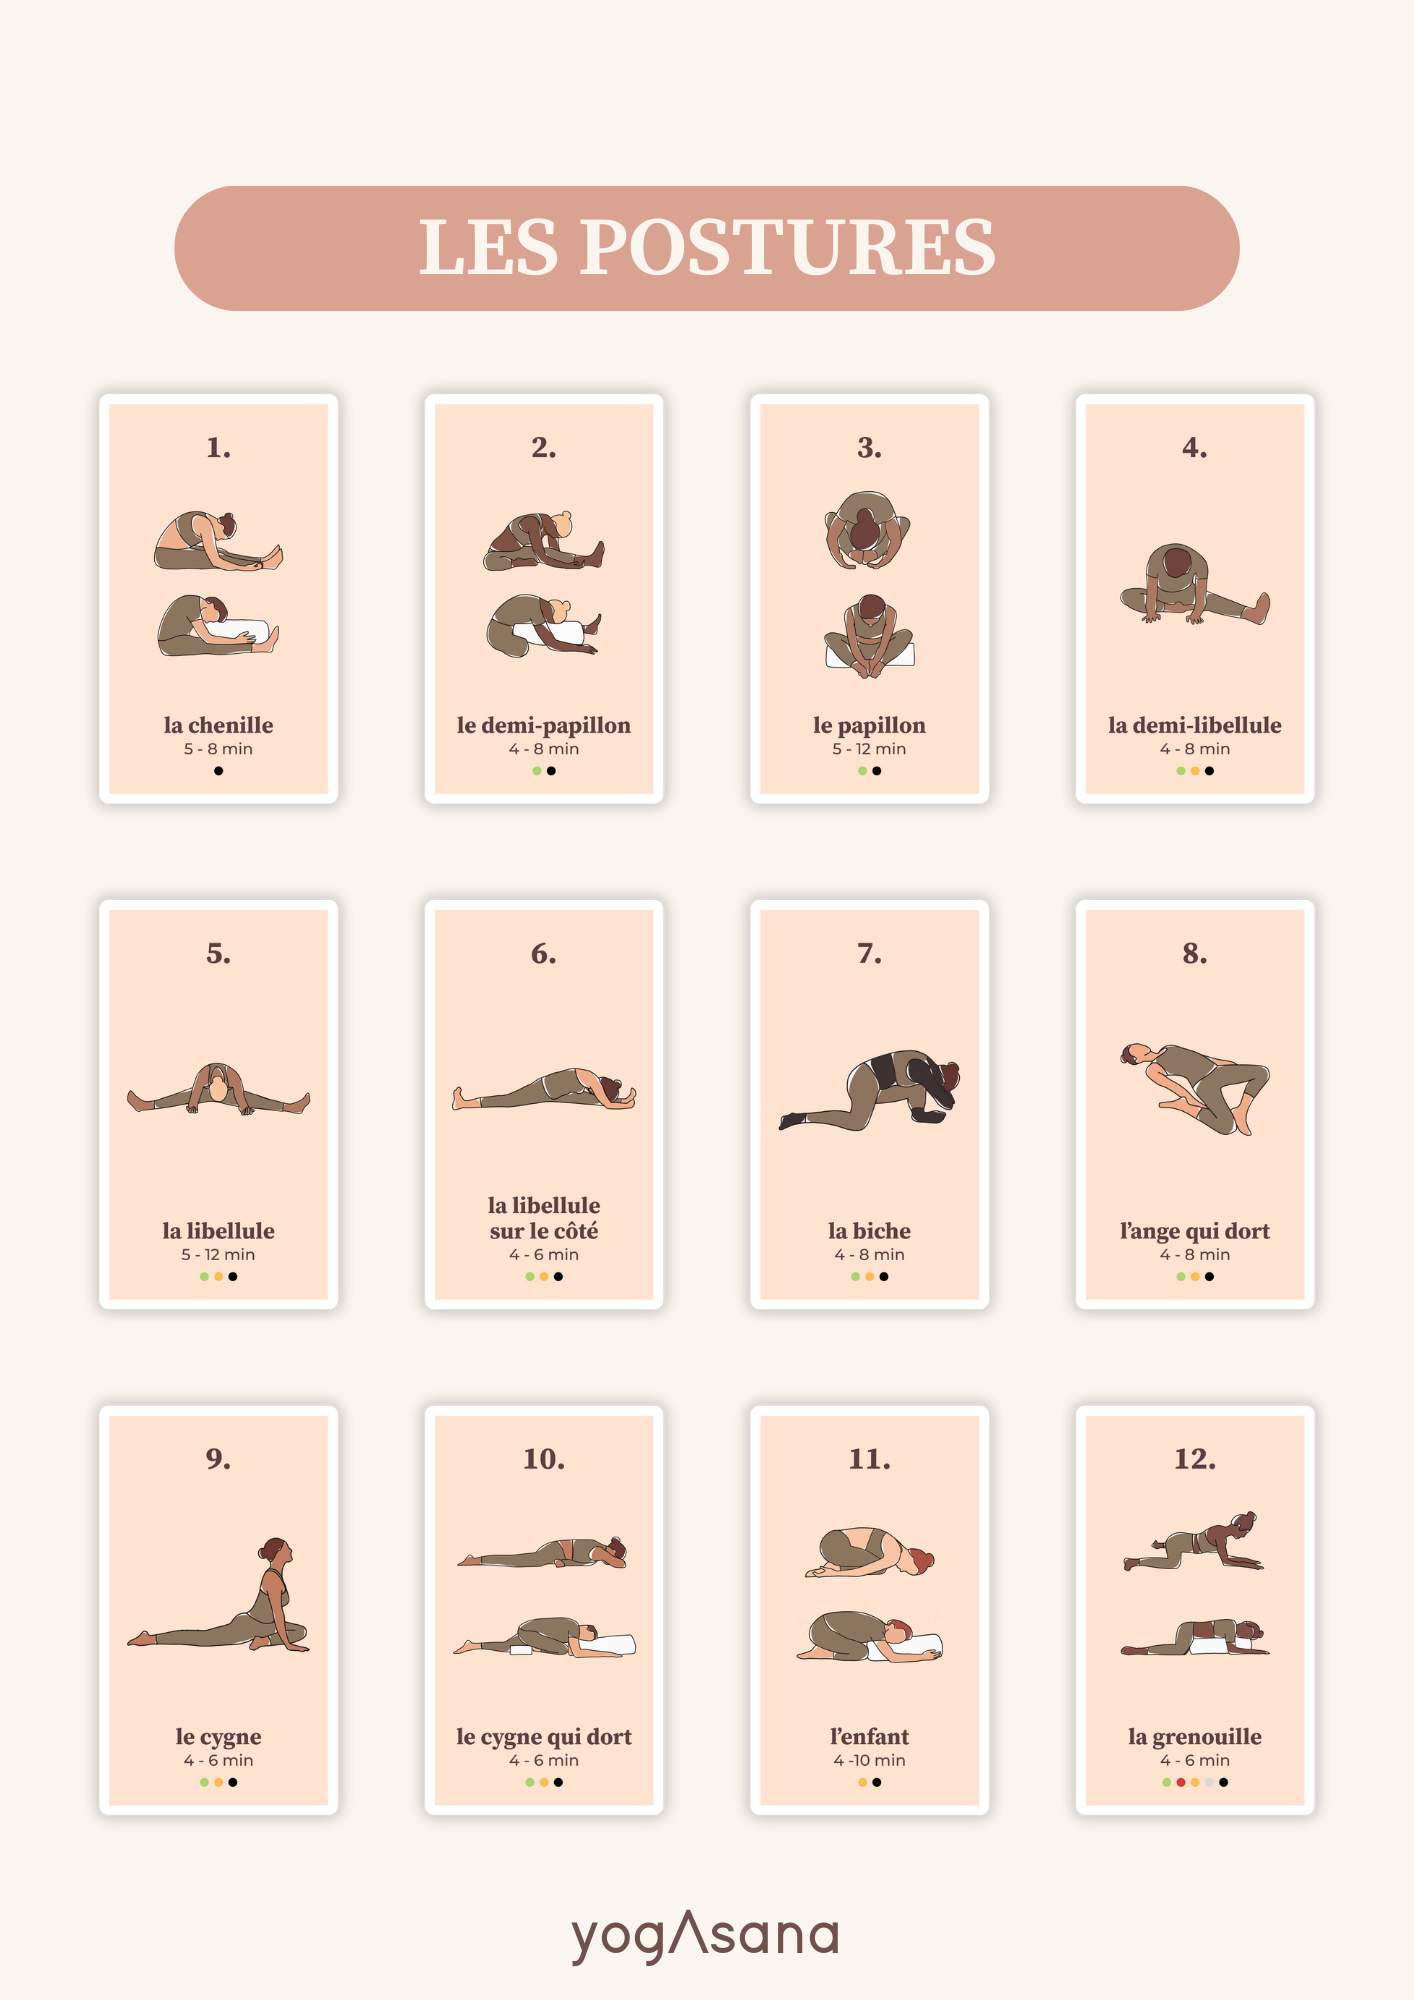 Free Sequence Builder | TINT Yoga